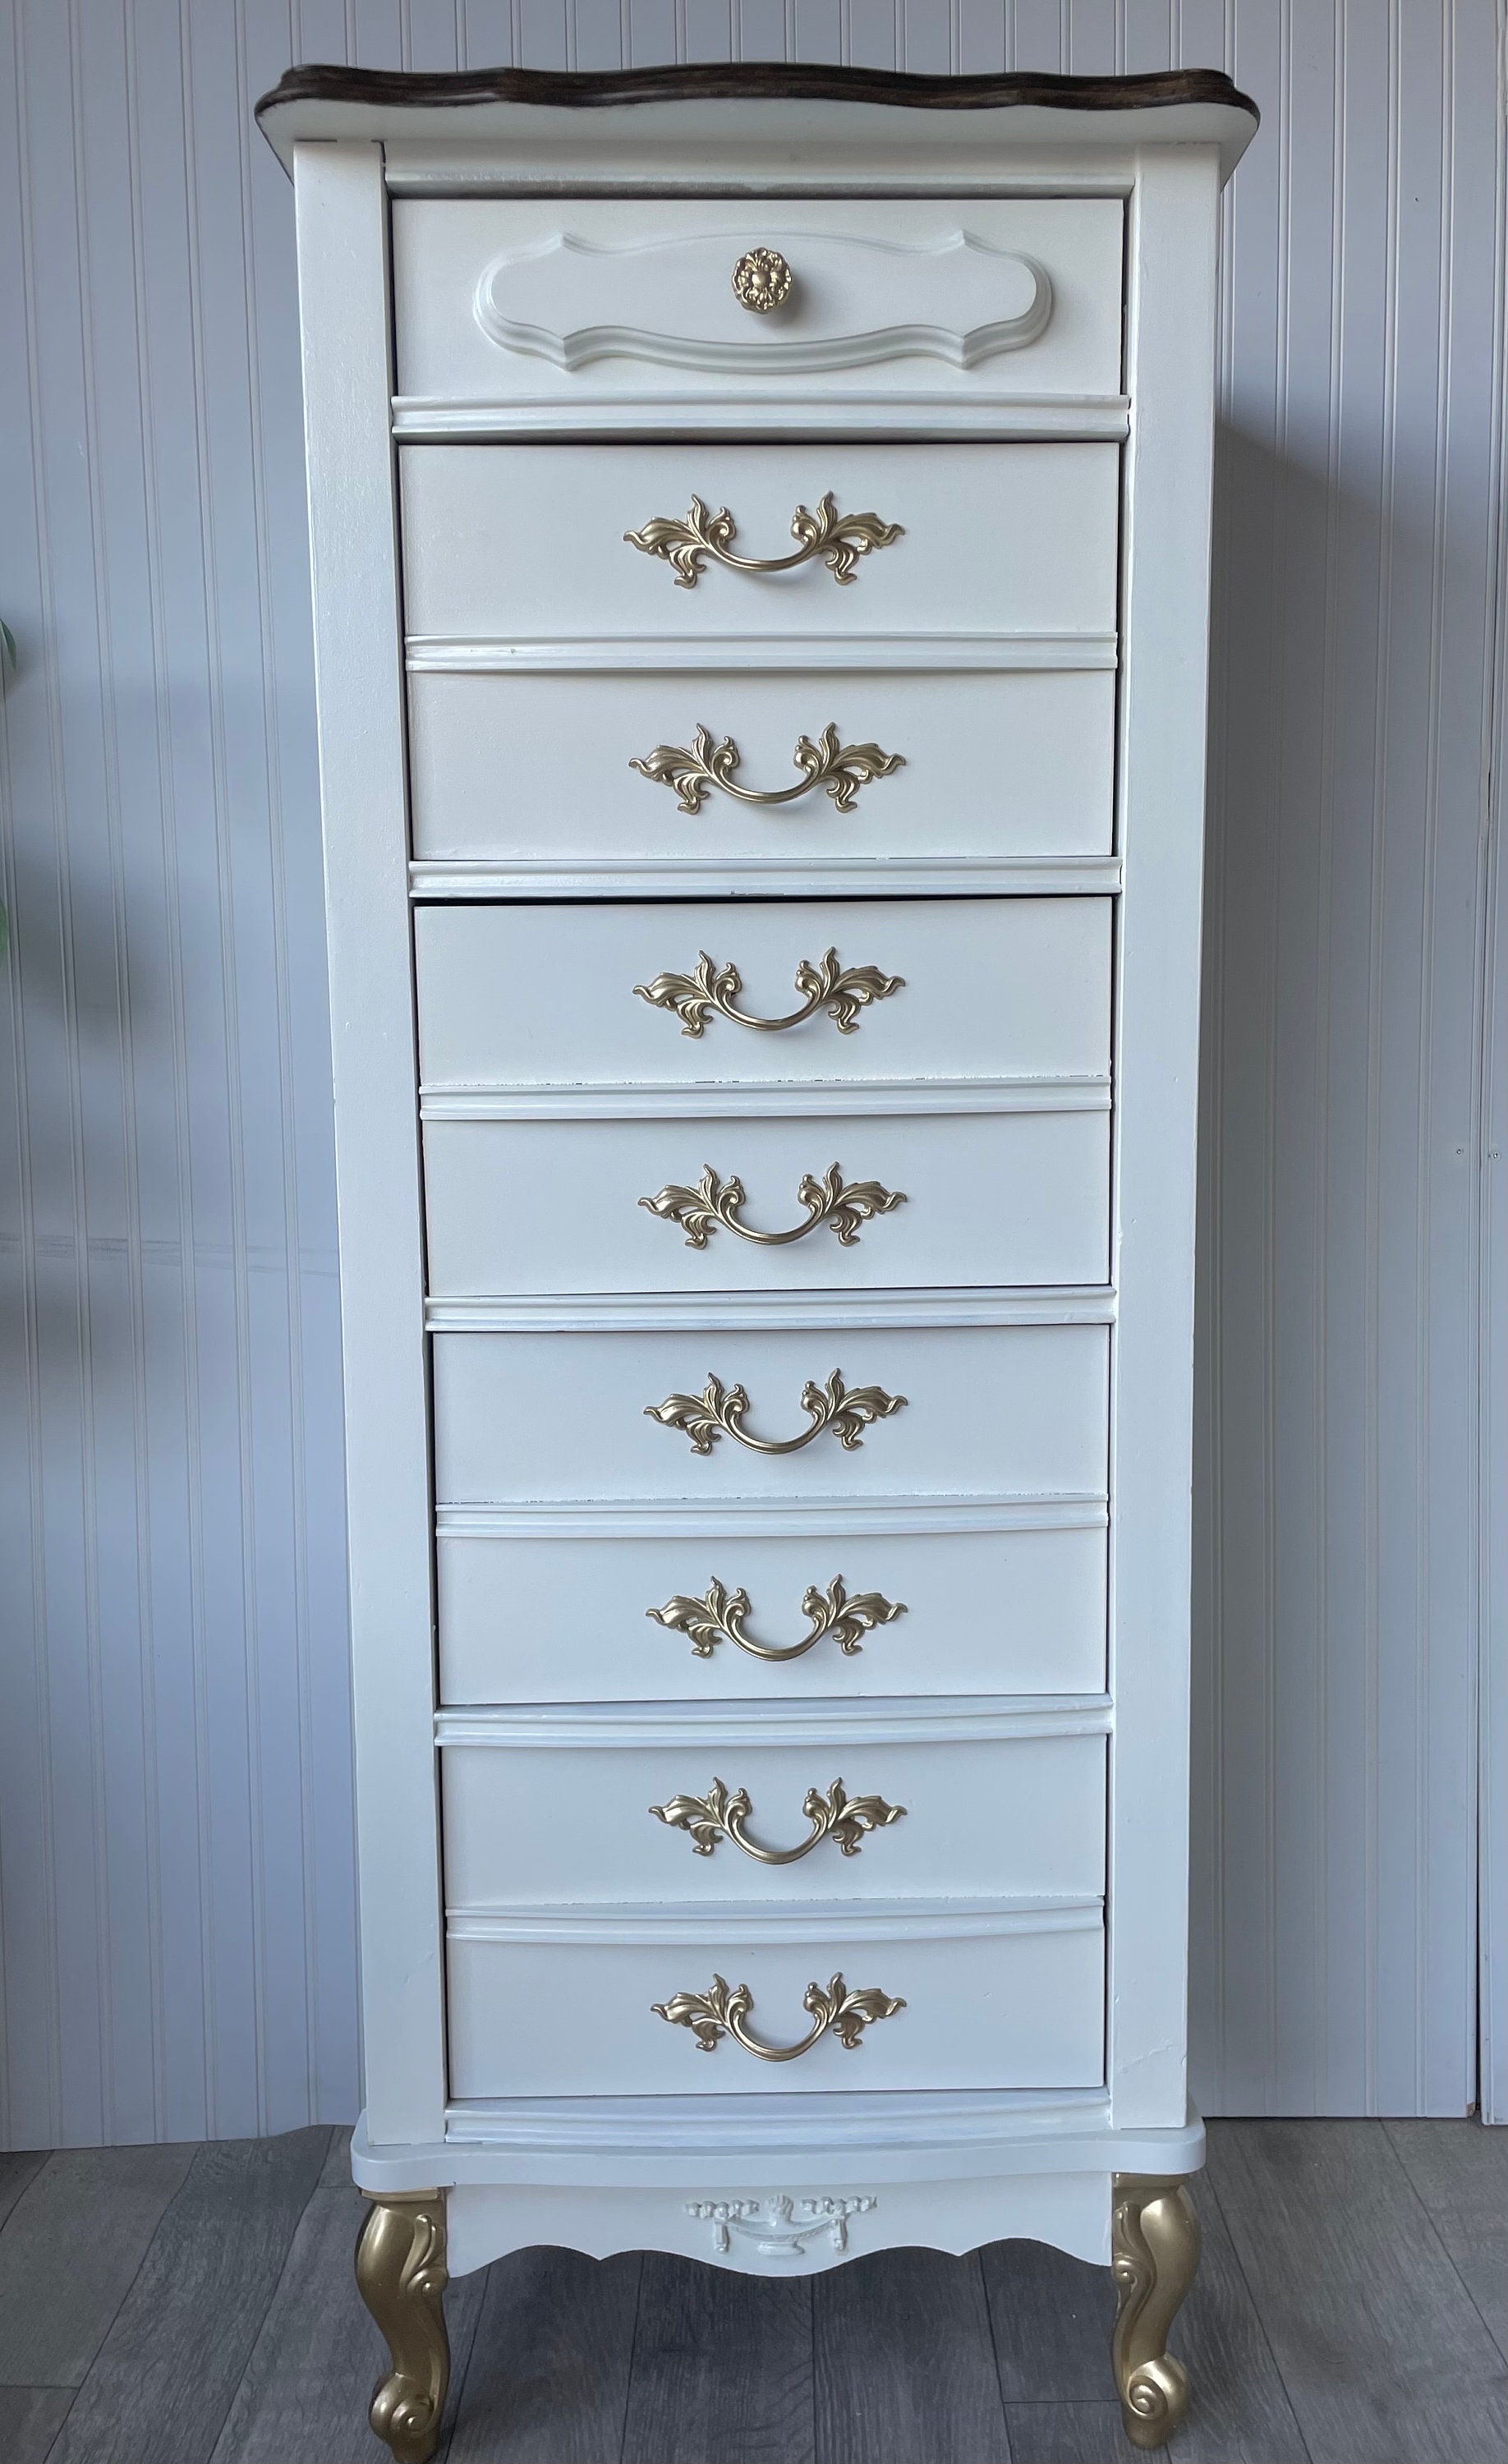 Vintage Dixie Furniture French Provincial Style Chest of Drawers